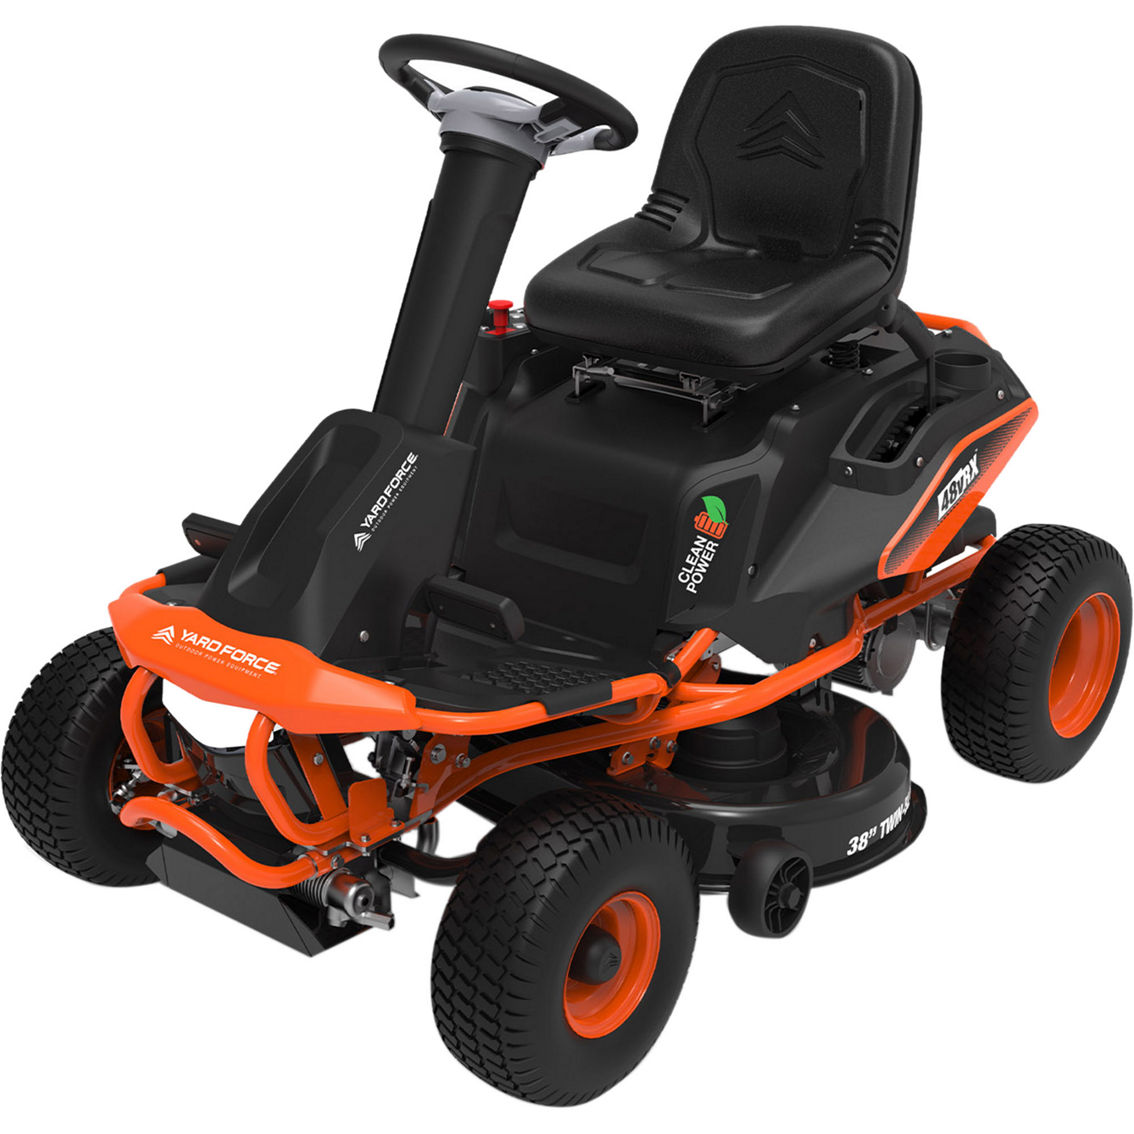 Yard Force 48v Brushless 38 in. Battery-Powered Rear Engine Riding Lawn Mower - Image 2 of 10